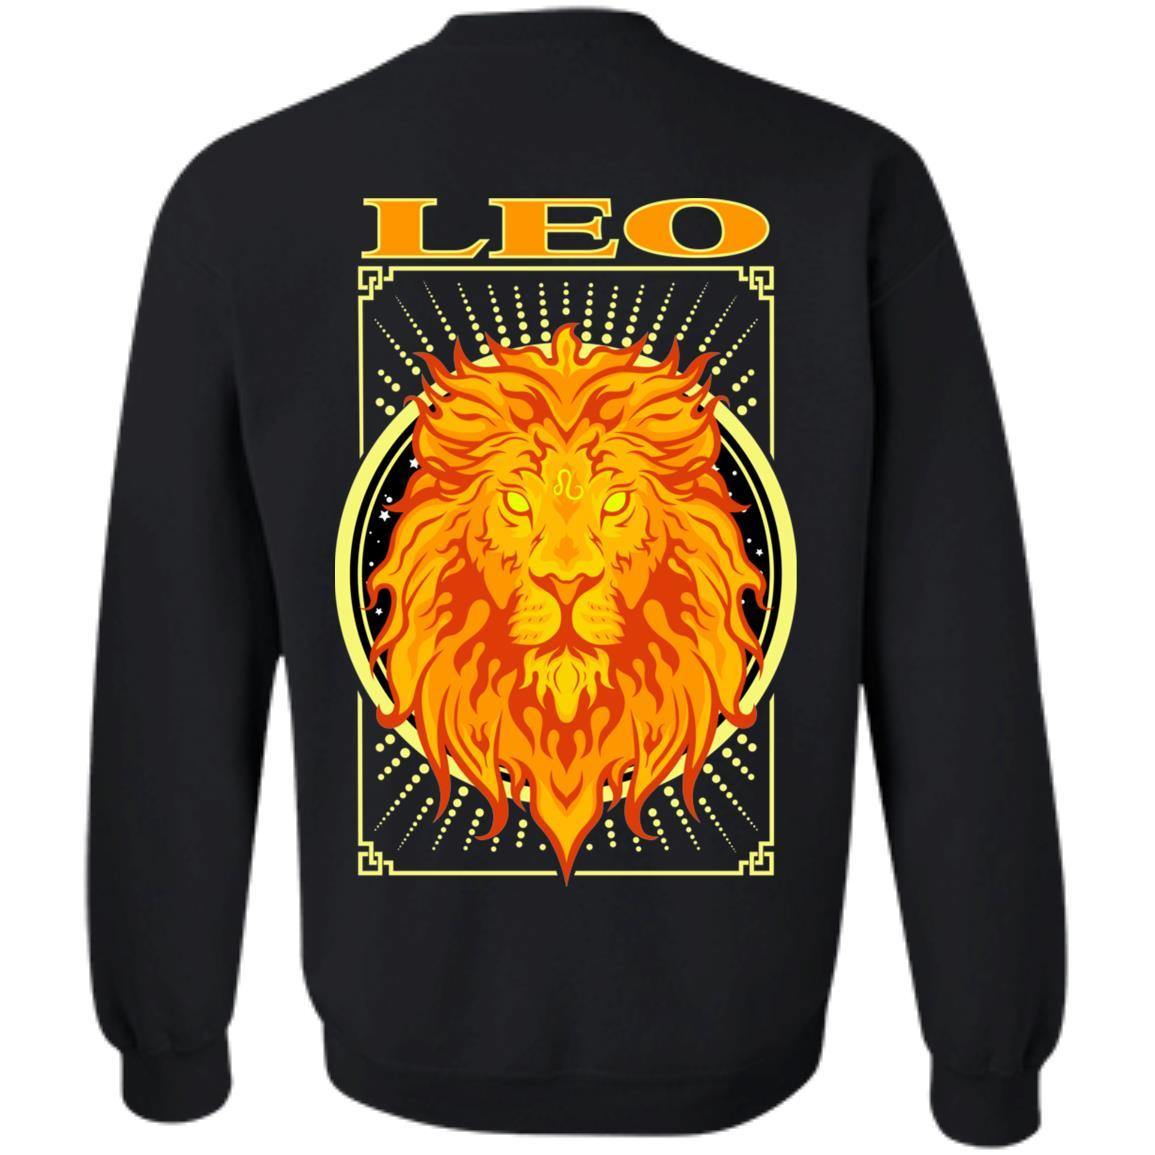 LEO DESIGN ON BACK AND SMALL SCORP ZONE LOGO ON FRONT -Z65 Crewneck Pullover Sweatshirt - ScorpZone